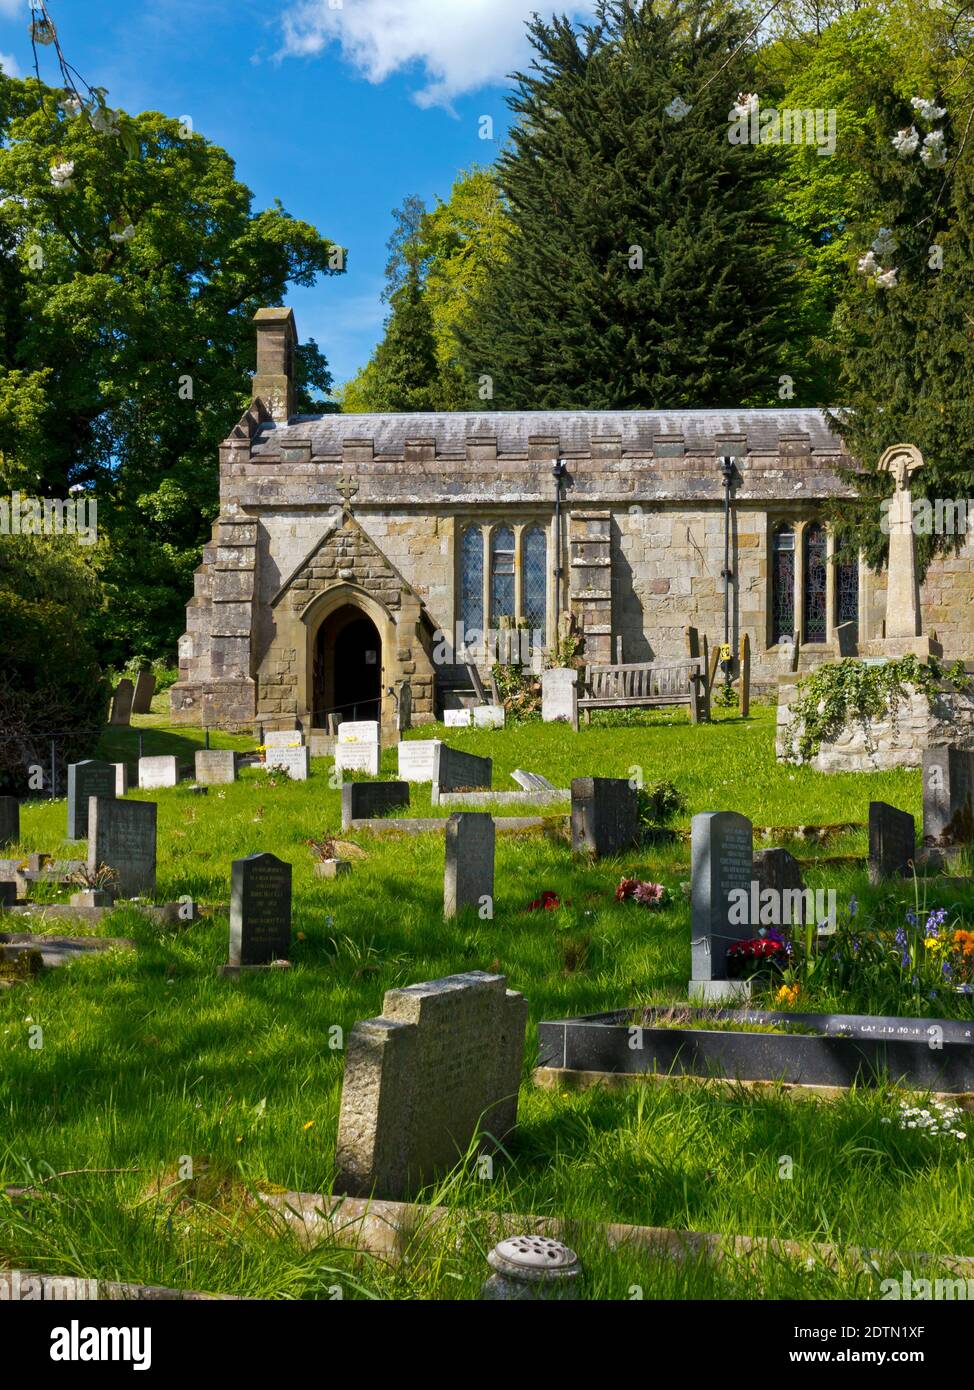 St Margaret's Church a thirteenth century Grade II listed parish church in Carsington Derbyshire Dales England UK with graveyard in foreground. Stock Photo